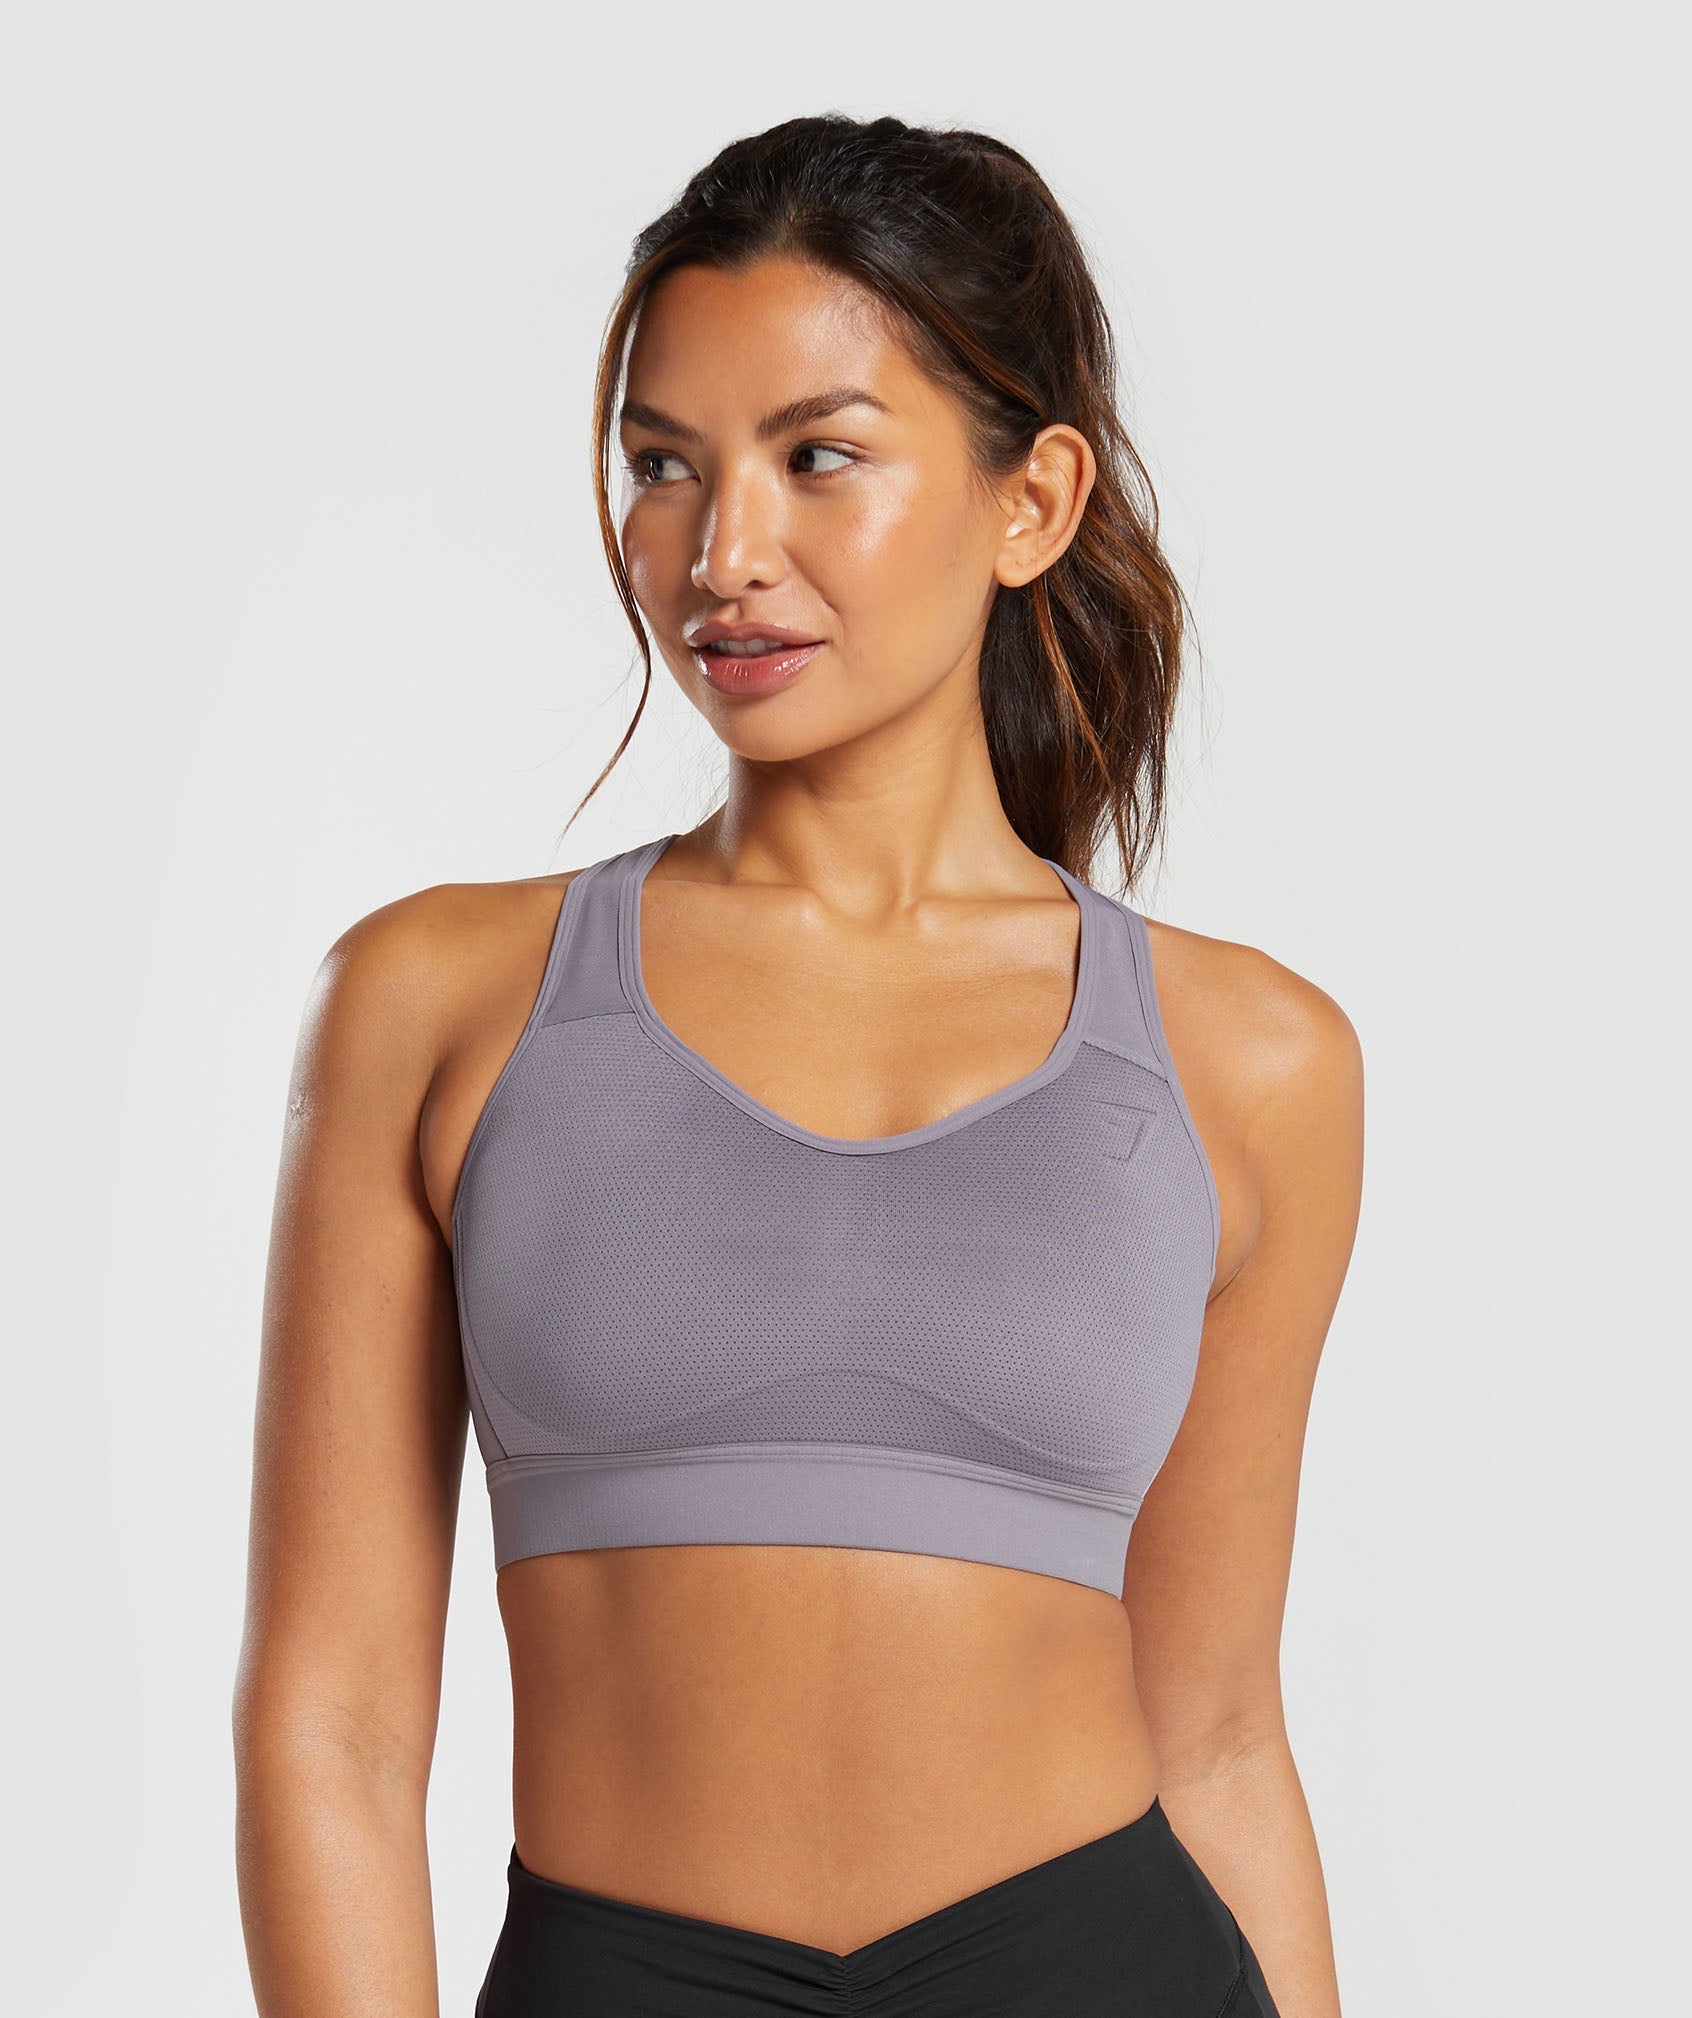 Sports Bras - The Essential Woman Boutique